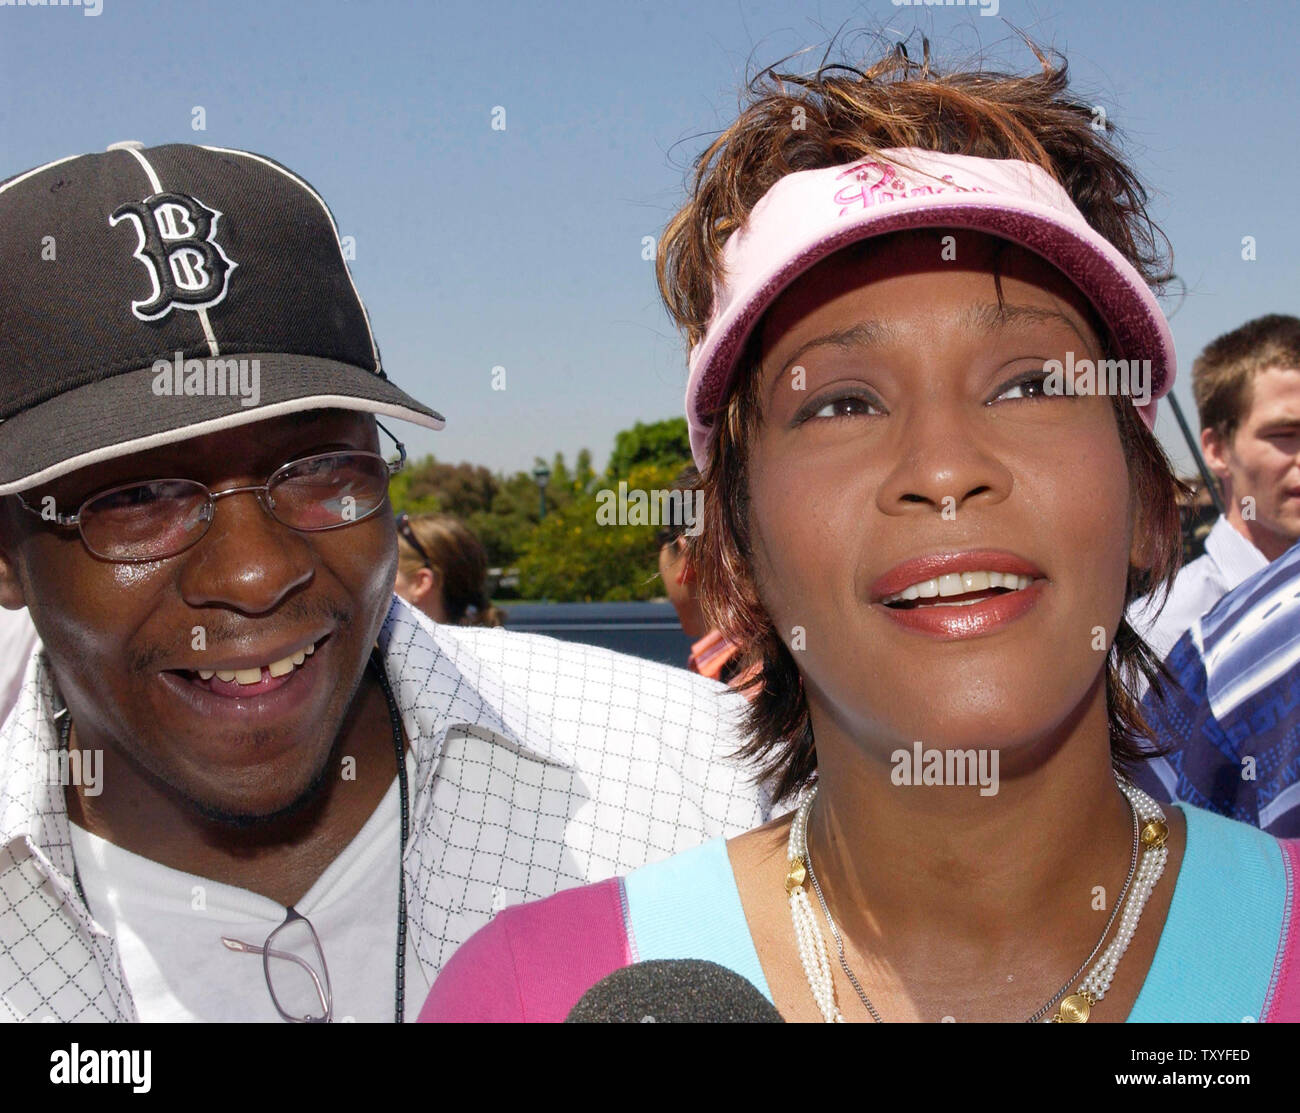 Whitney Houston (R) arrives with her husband, Bobby Brown at Disneyland in Anaheim, California on August 7, 2004. Houston has filed for divorce from Brown, her spokeswoman said on Wednesday, September 13, 2006 following 14 tumultuous years of marriage and tabloid headlines. (UPI Photo/Jim Ruymen/file photo) Stock Photo